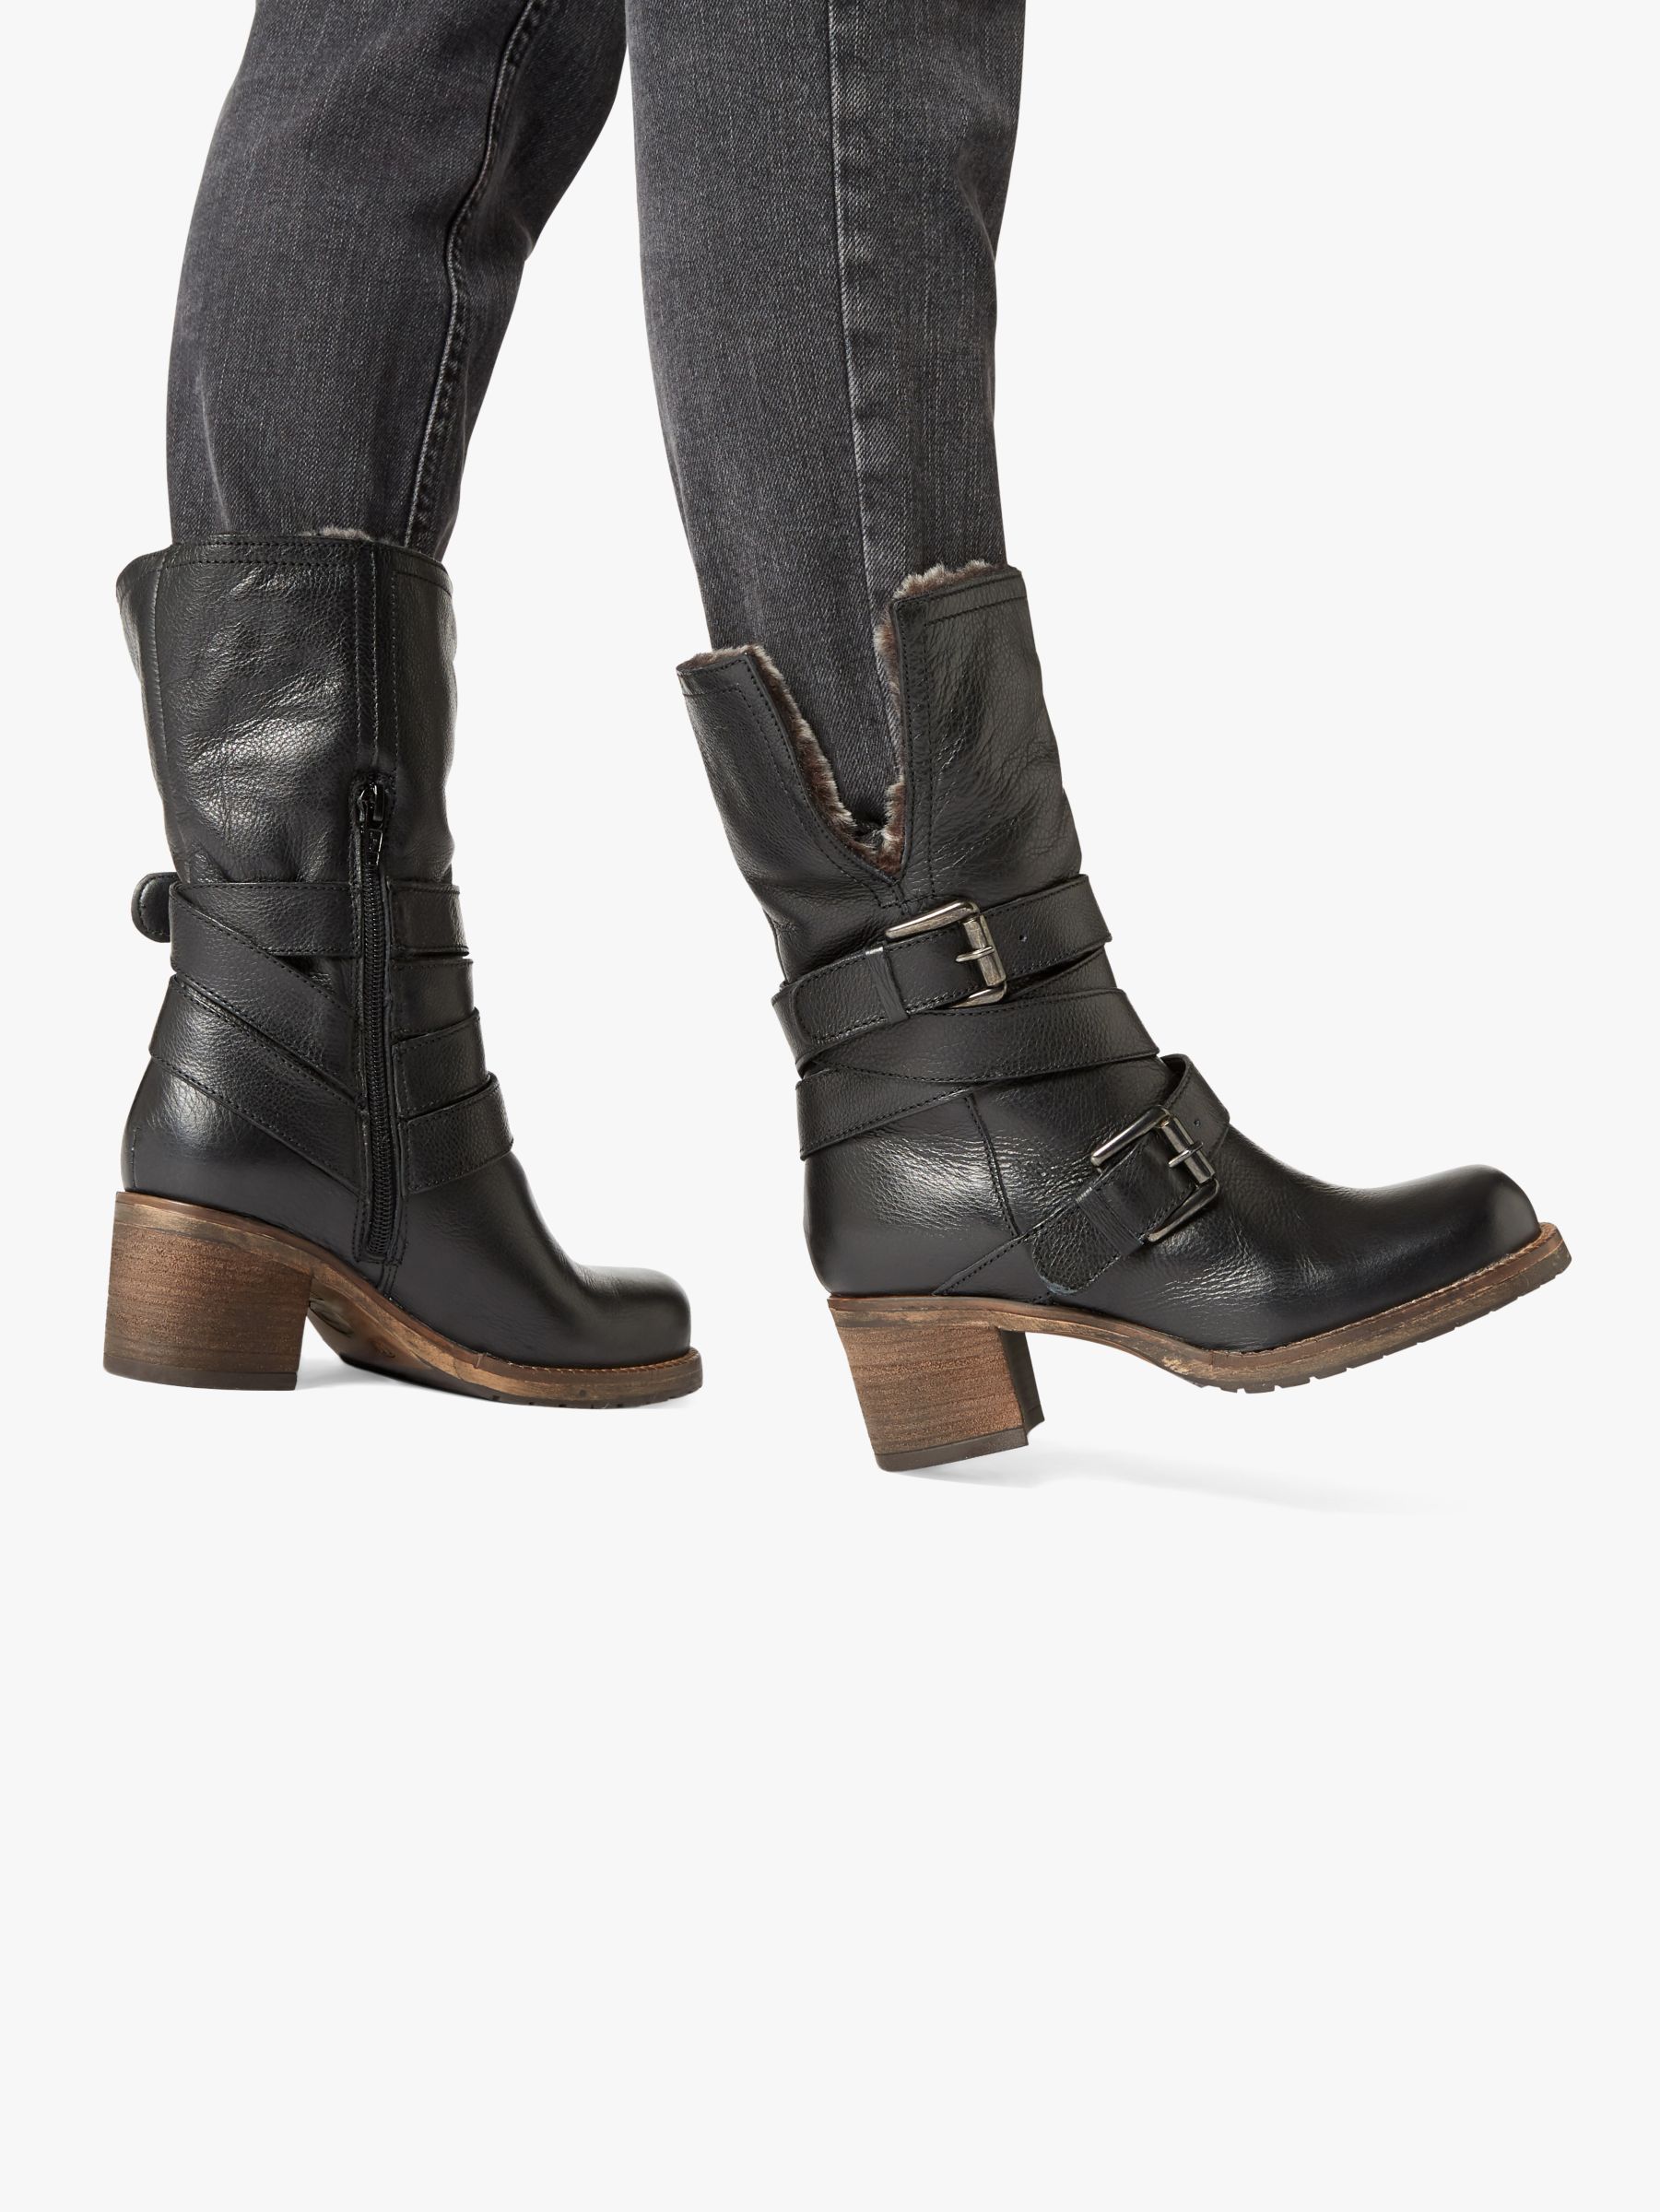 sorel women's out n about plus booties